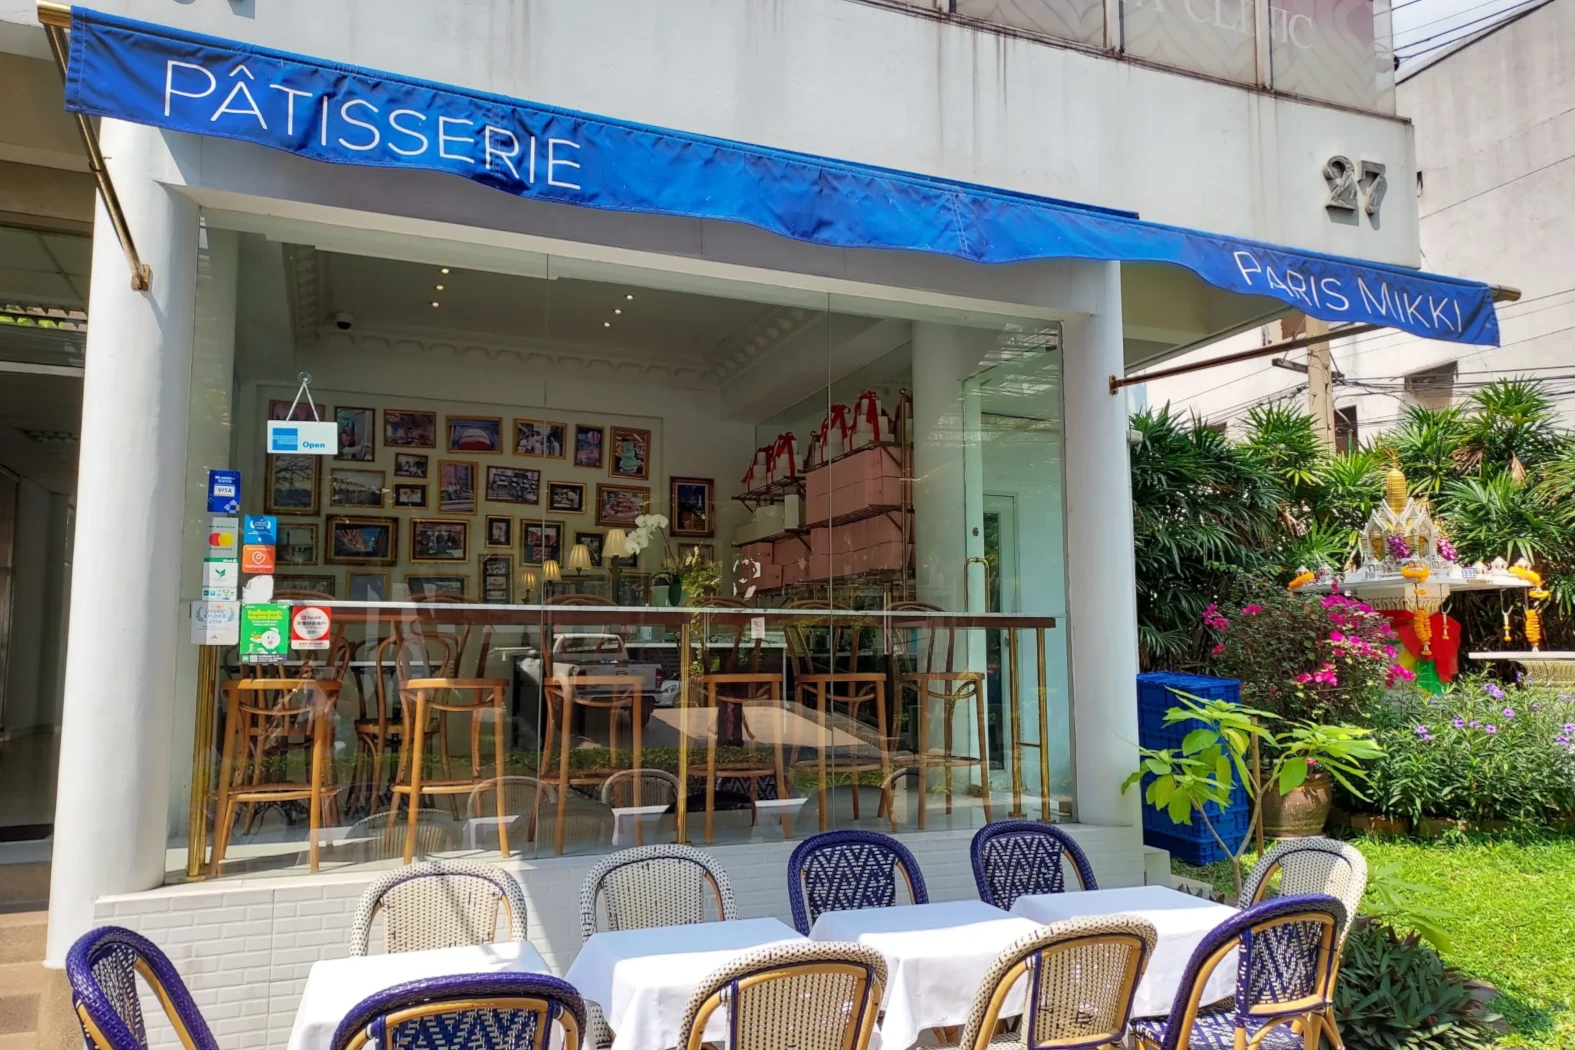 the front of Paris Makki's pattiserie store with outdoor tables